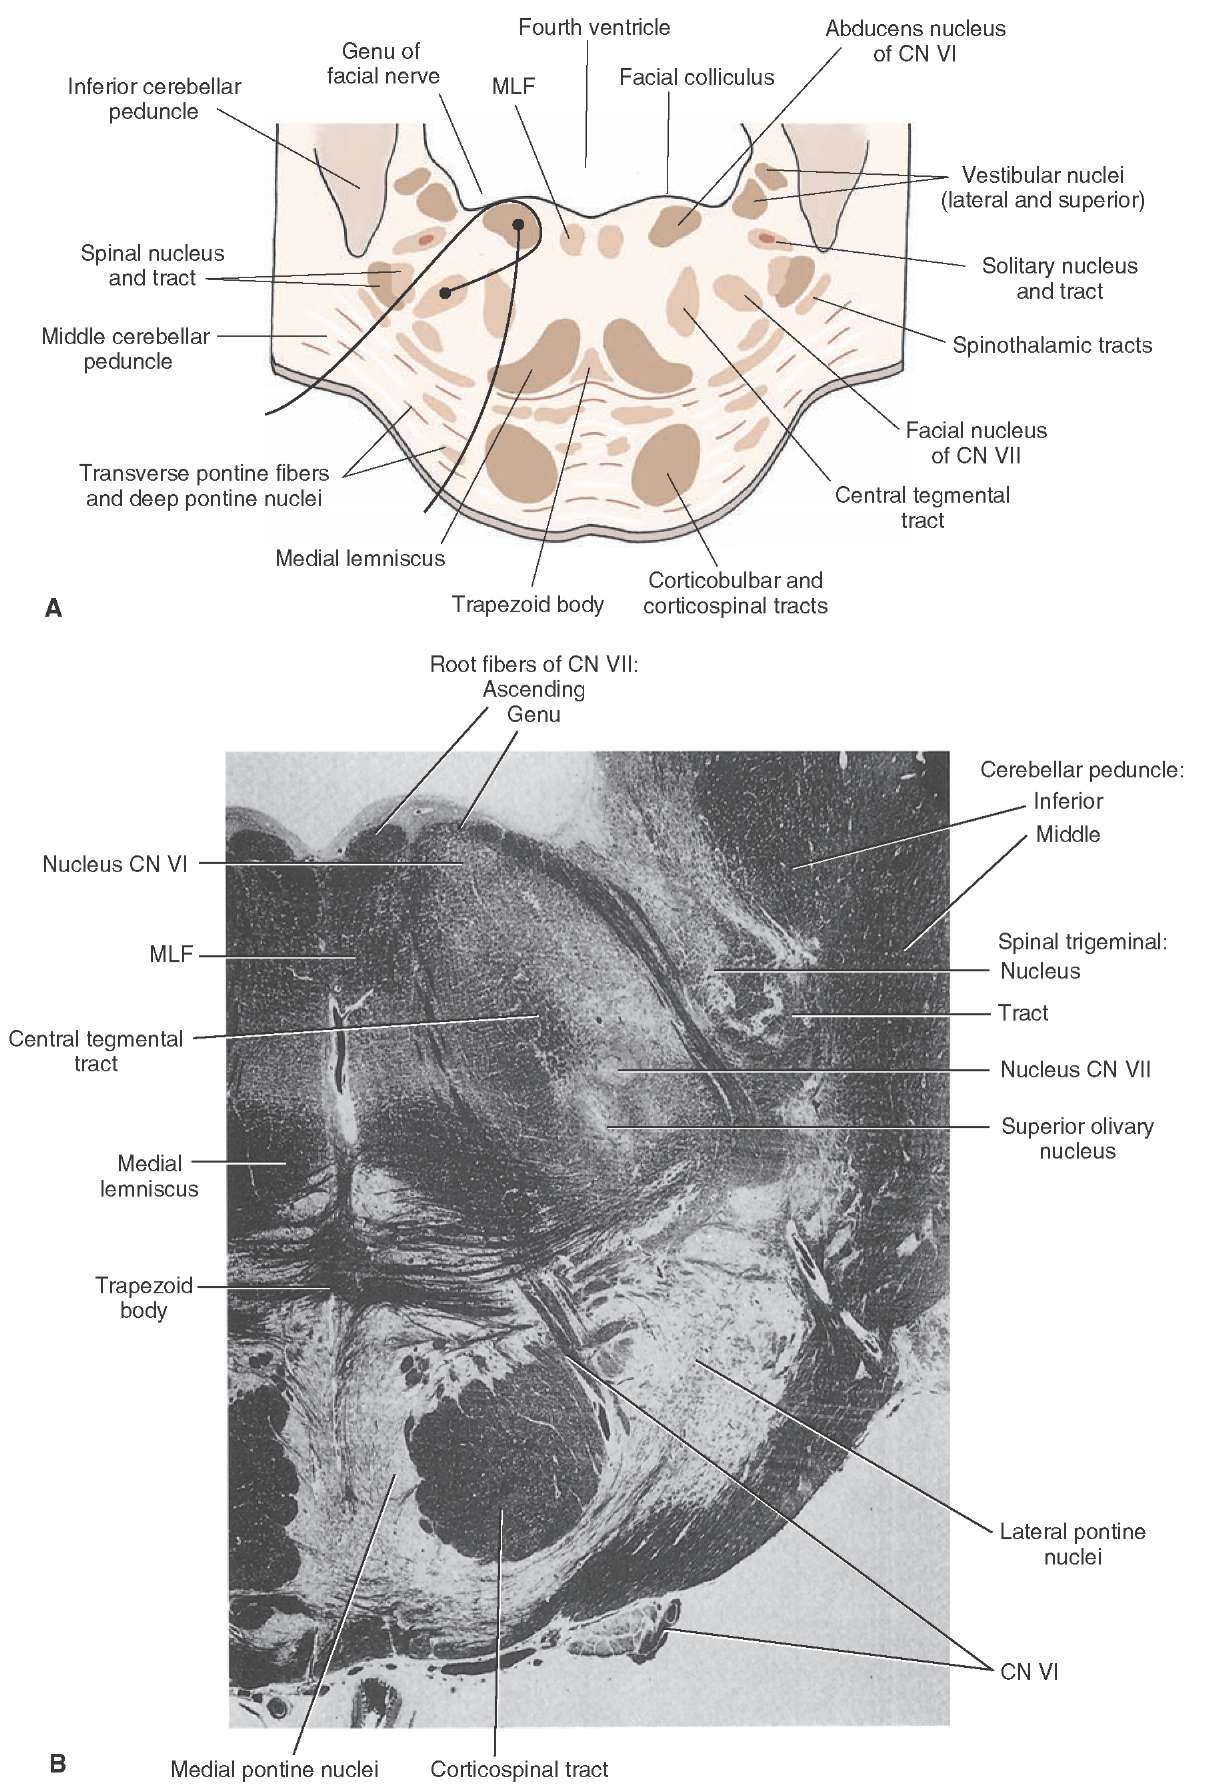  Caudal pons. (A) Cross section through the caudal aspect of the pons at the level of the facial colliculus of the pons. Note that the axons of cranial nerve (CN) VII pass dorsomedially around the dorsal aspect of the nucleus of CN VI, forming the facial colliculus, and then pass ventrolaterally to exit the brainstem. In contrast, the axons of CN VI pass ventrally to exit the brainstem in a relatively medial position. (B) Myelin-stained cross section through the caudal aspect of the pons. 